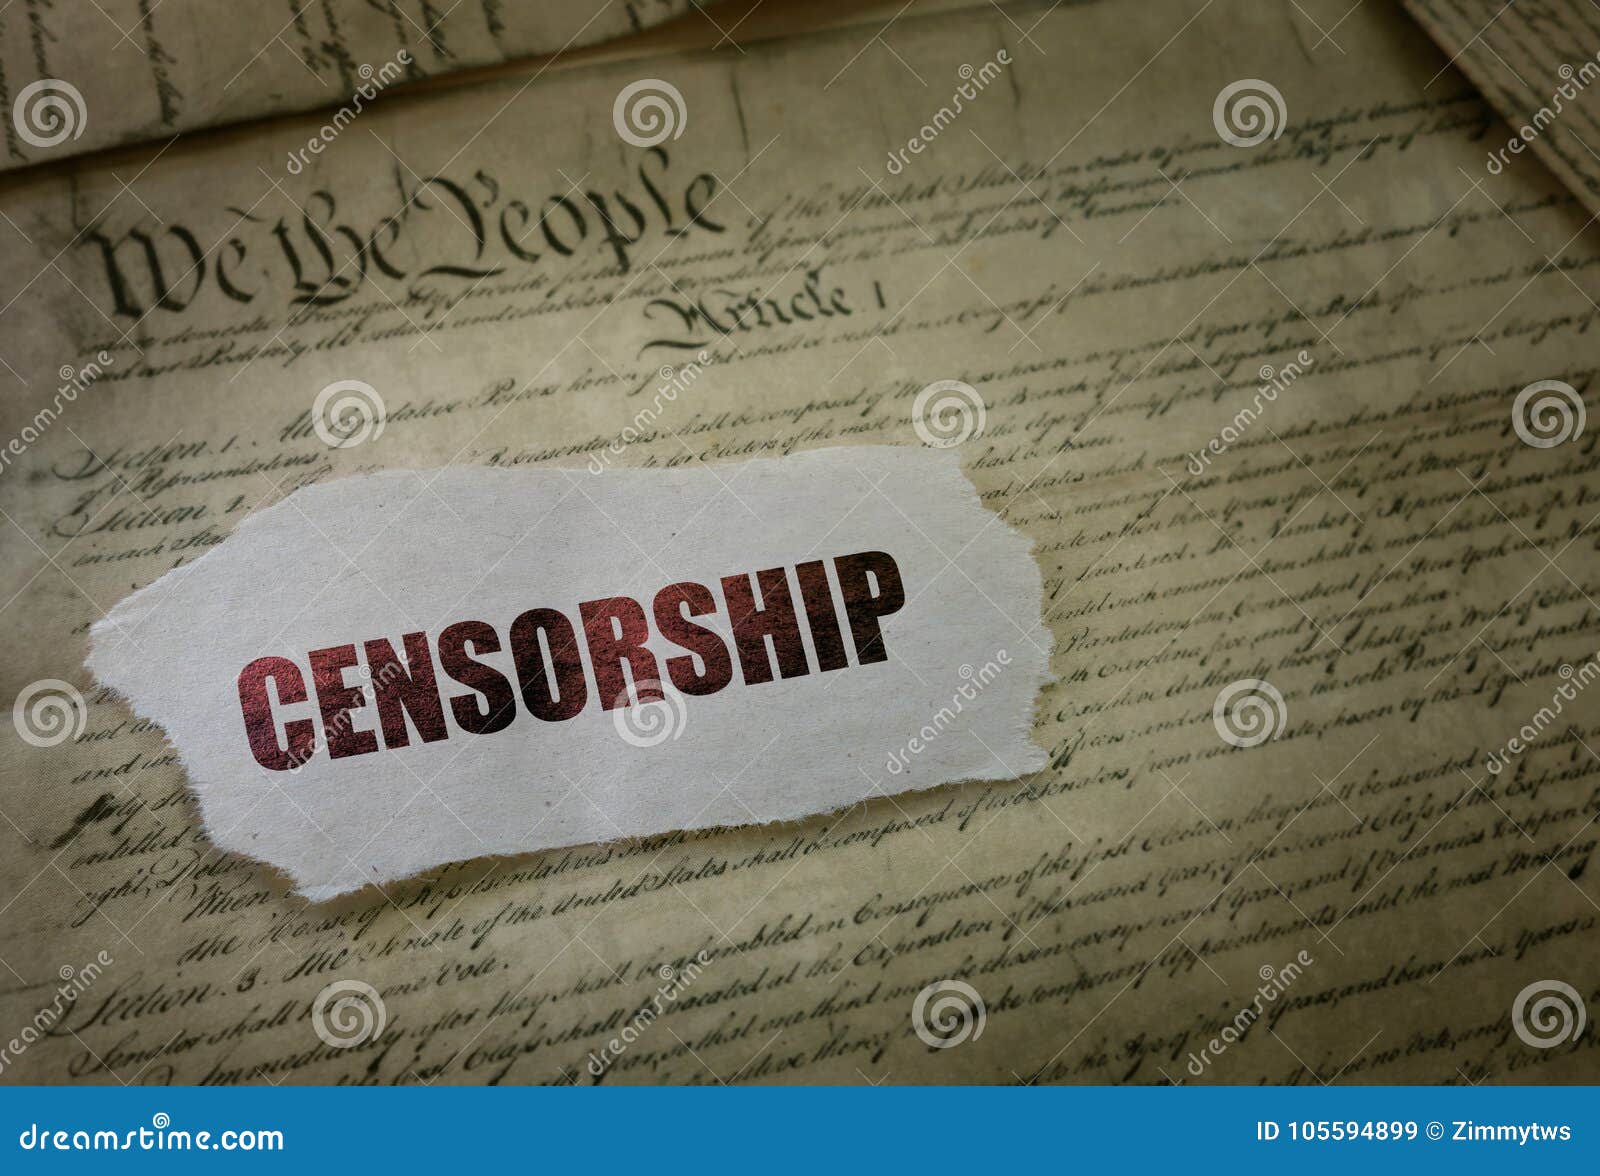 censorship control and freedom of speech